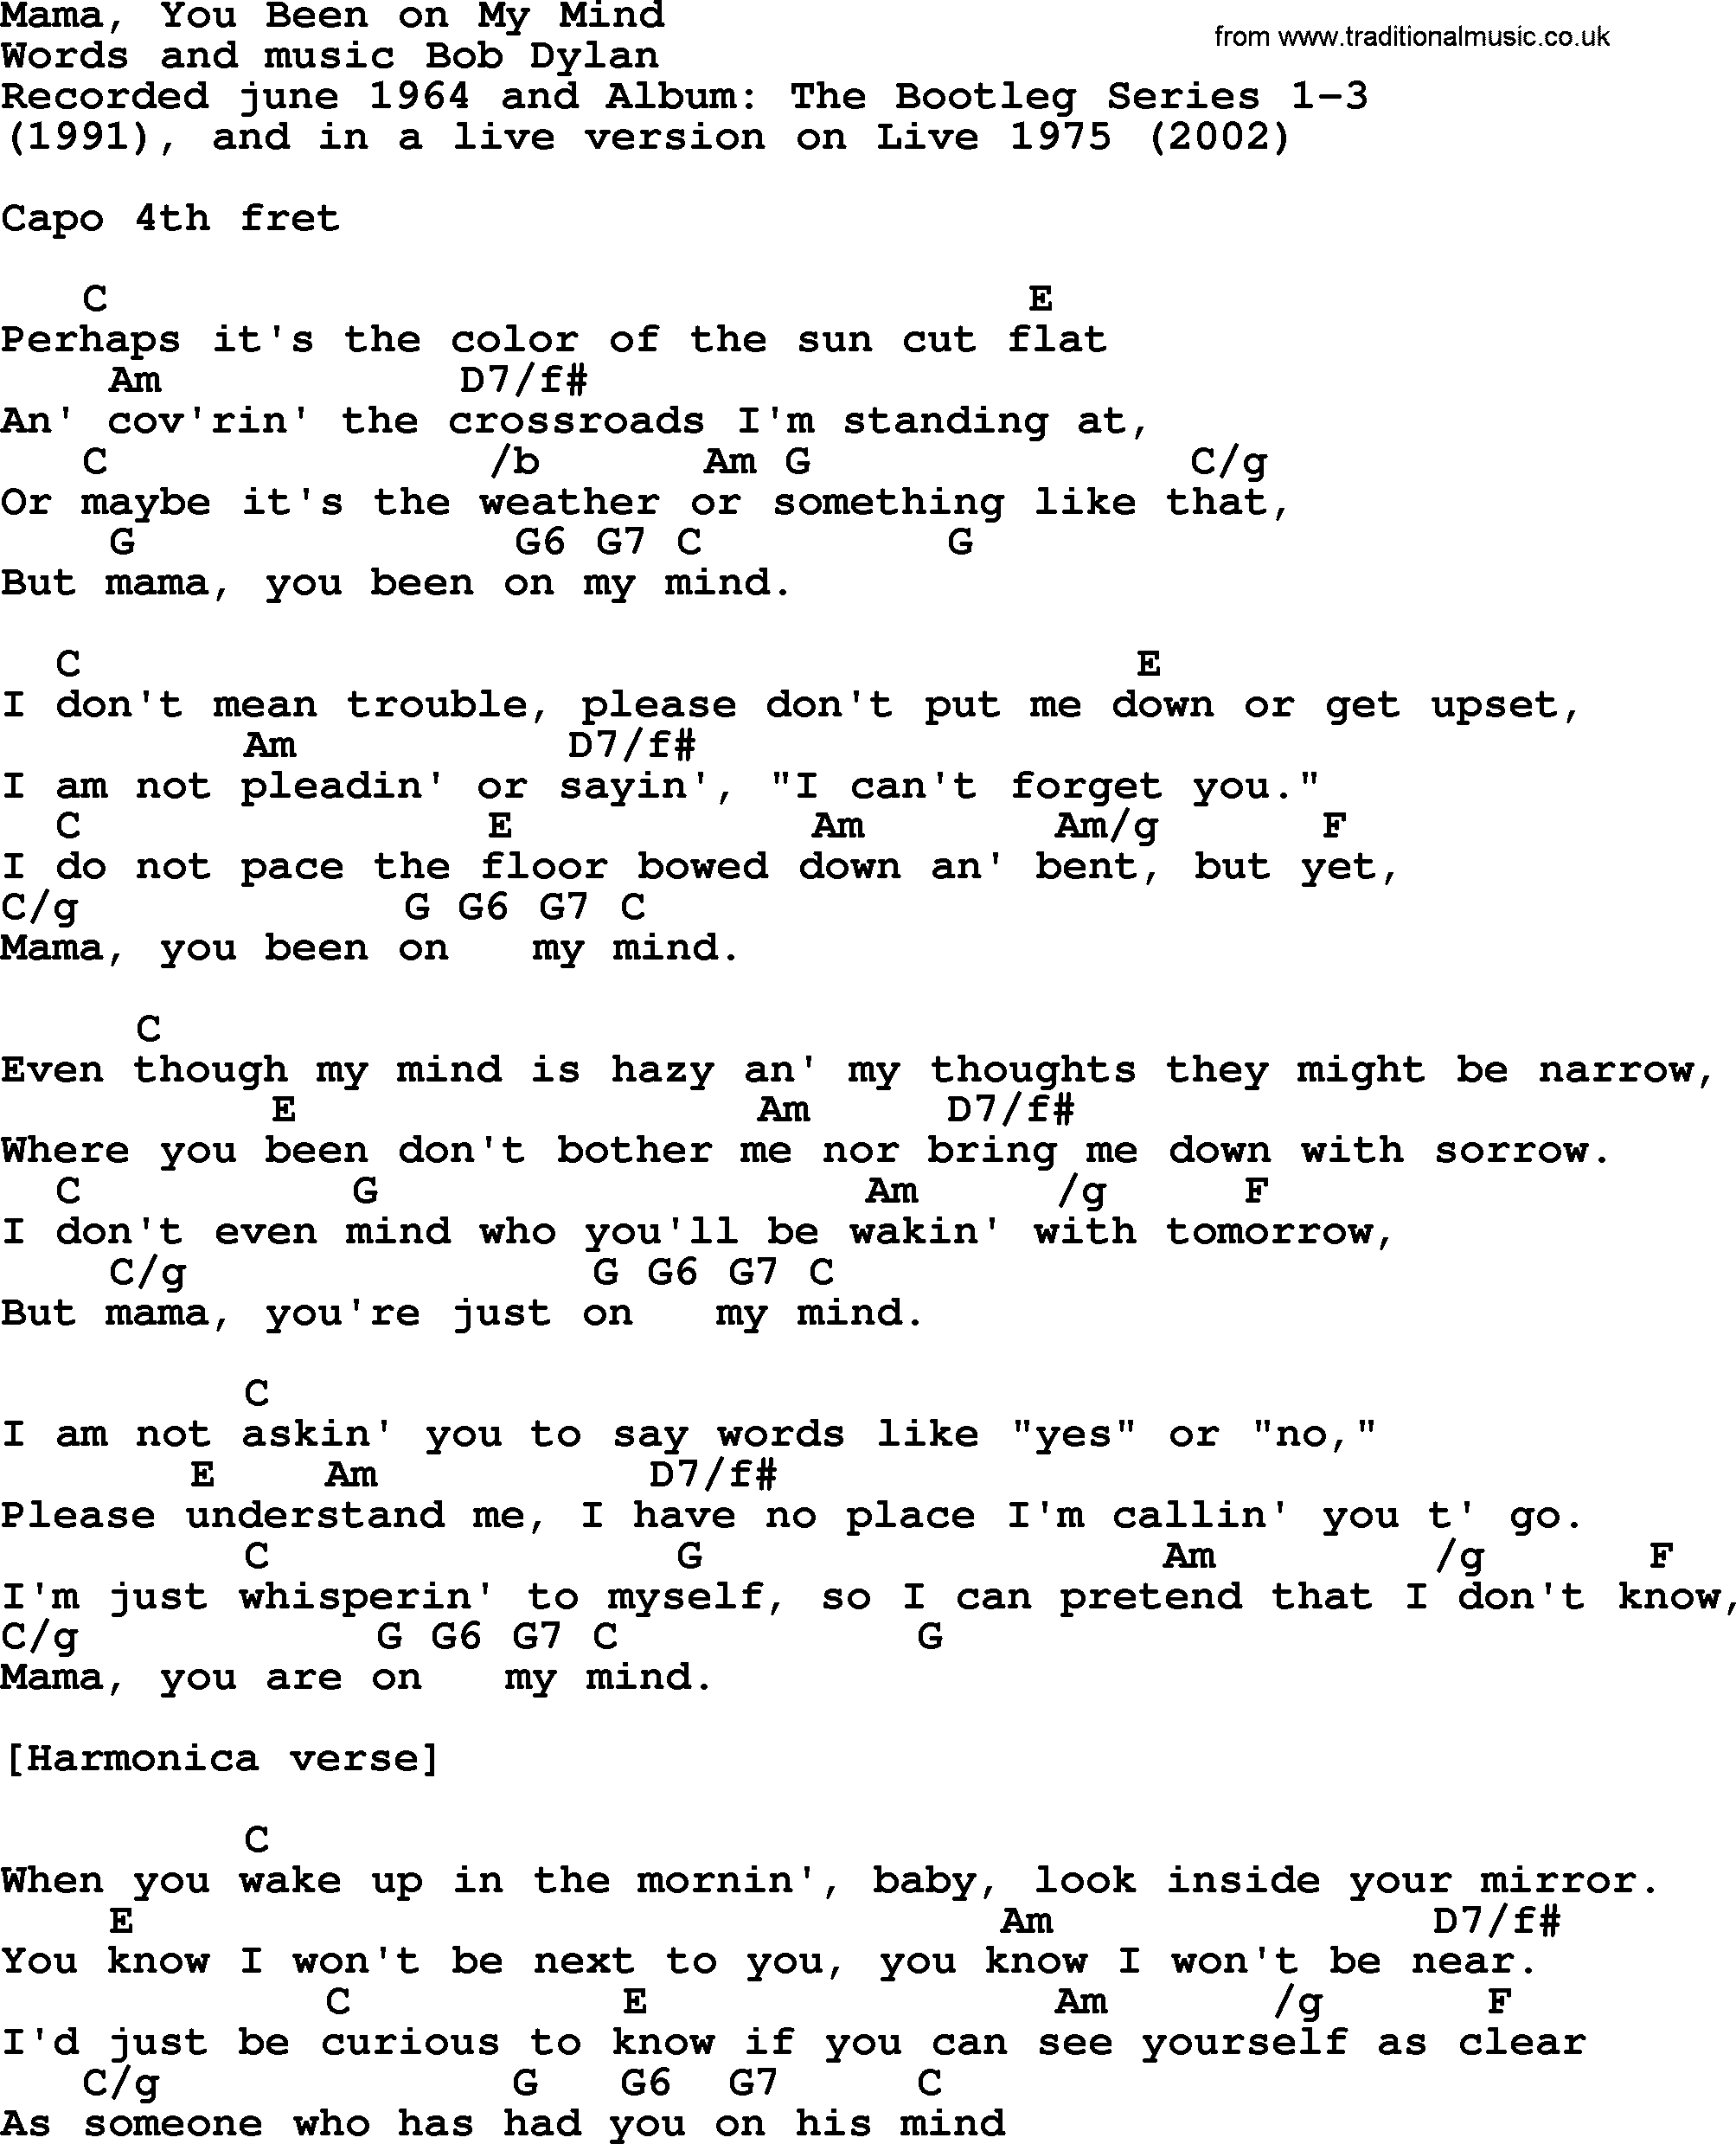 Bob Dylan song, lyrics with chords - Mama, You Been on My Mind